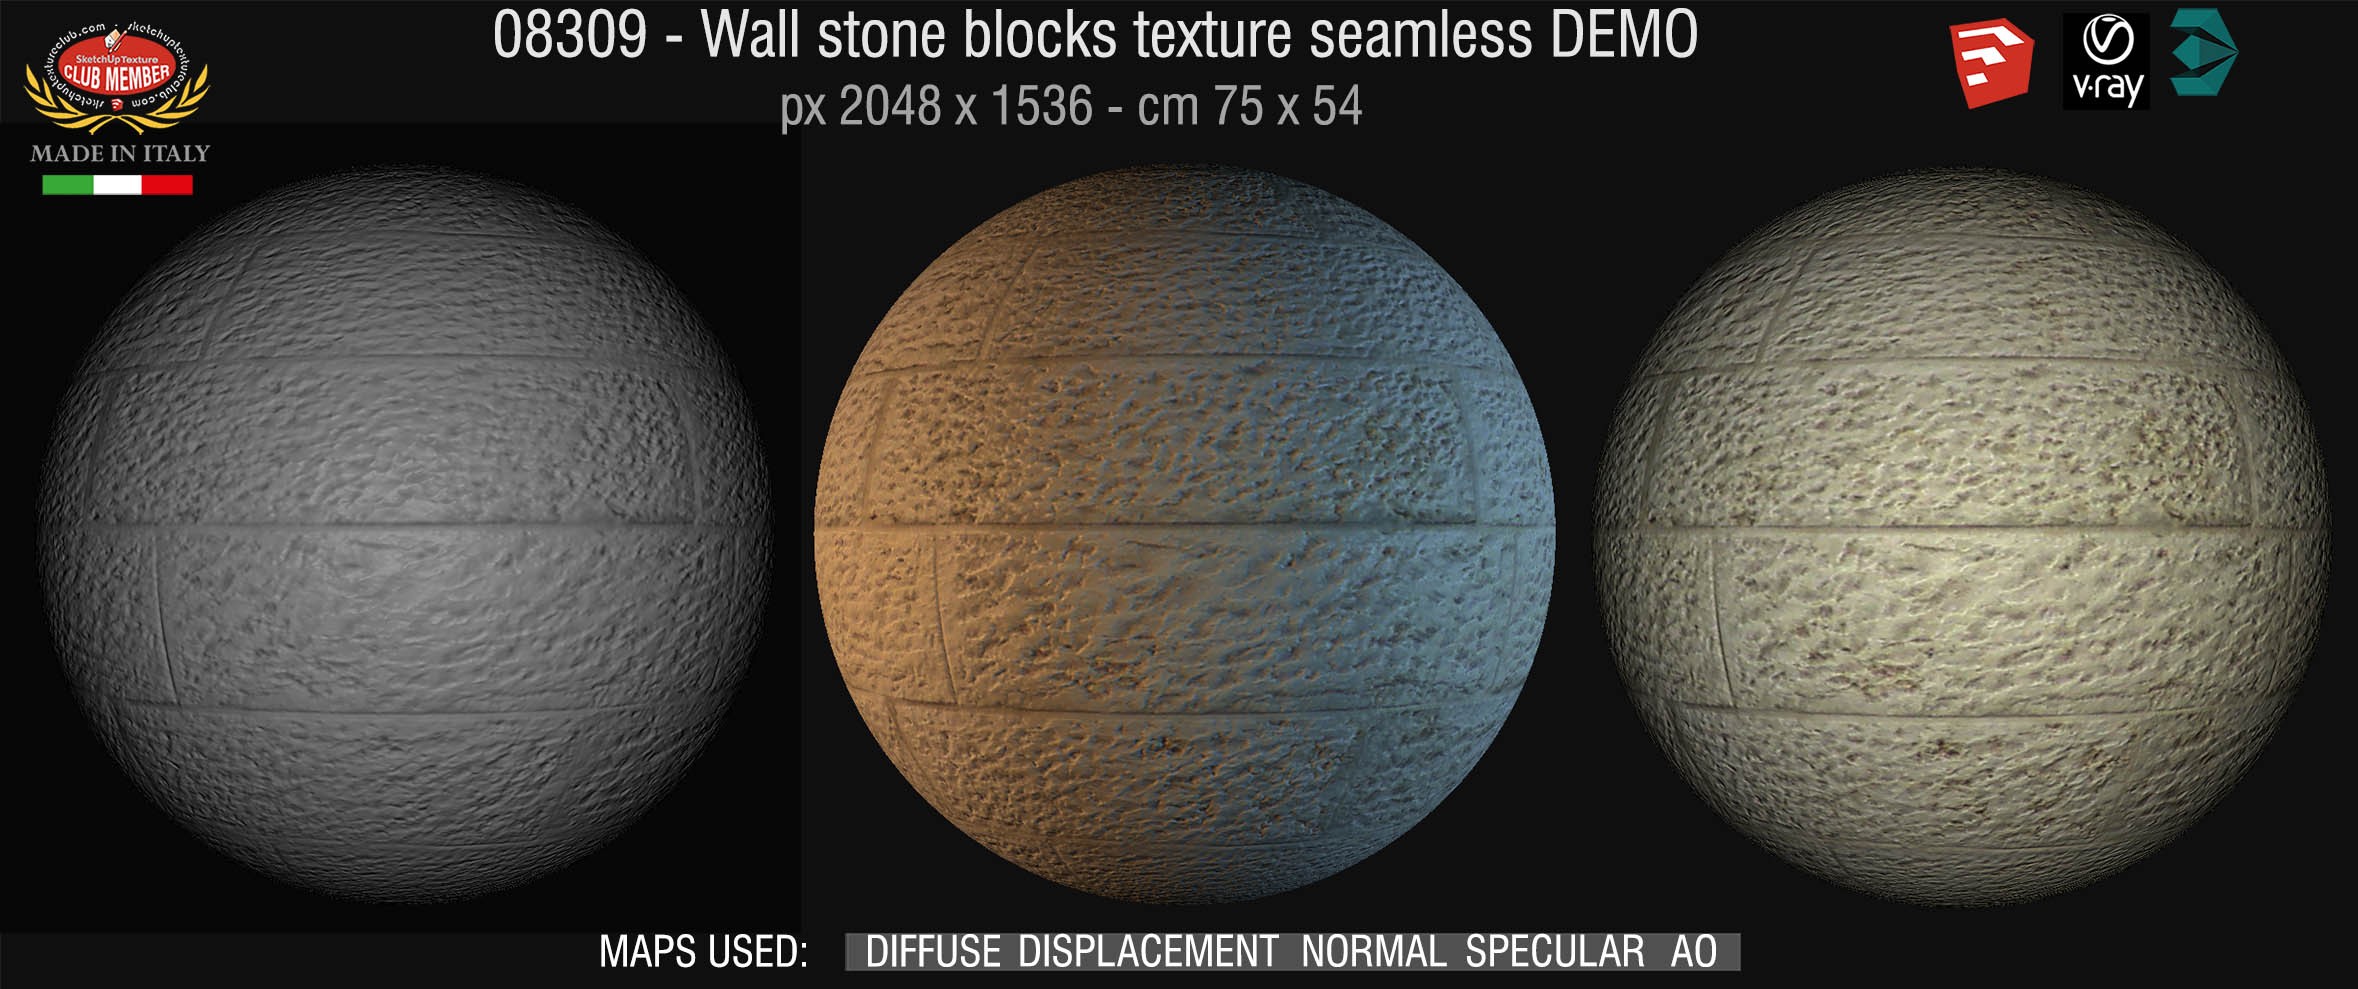 08309 HR Wall stone with regular blocks texture + maps DEMO